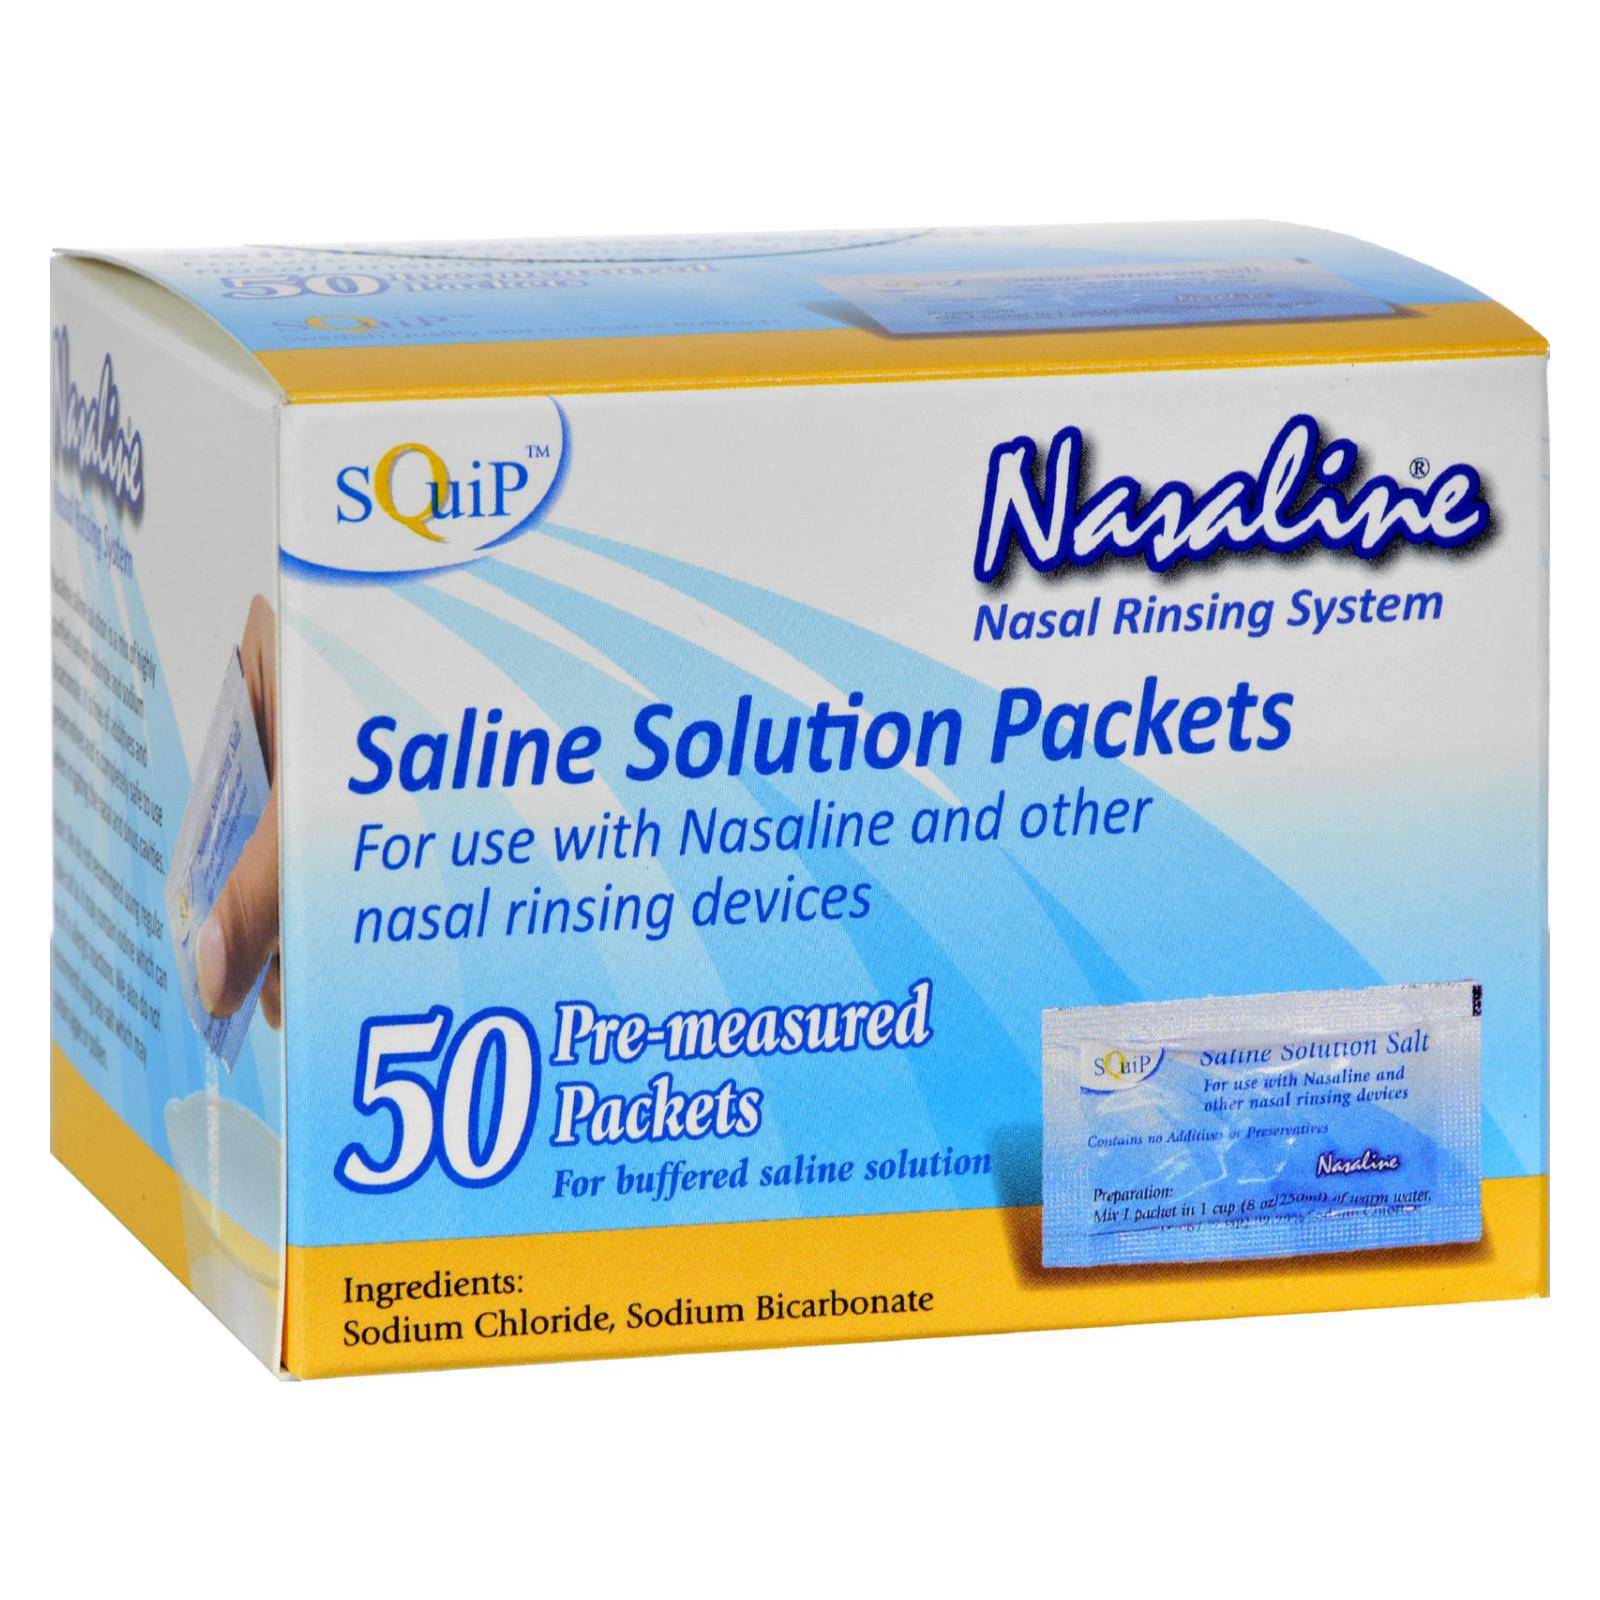 Buy Squip Products Nasaline Salt Pre-measured Packets - 50 Packets  at OnlyNaturals.us